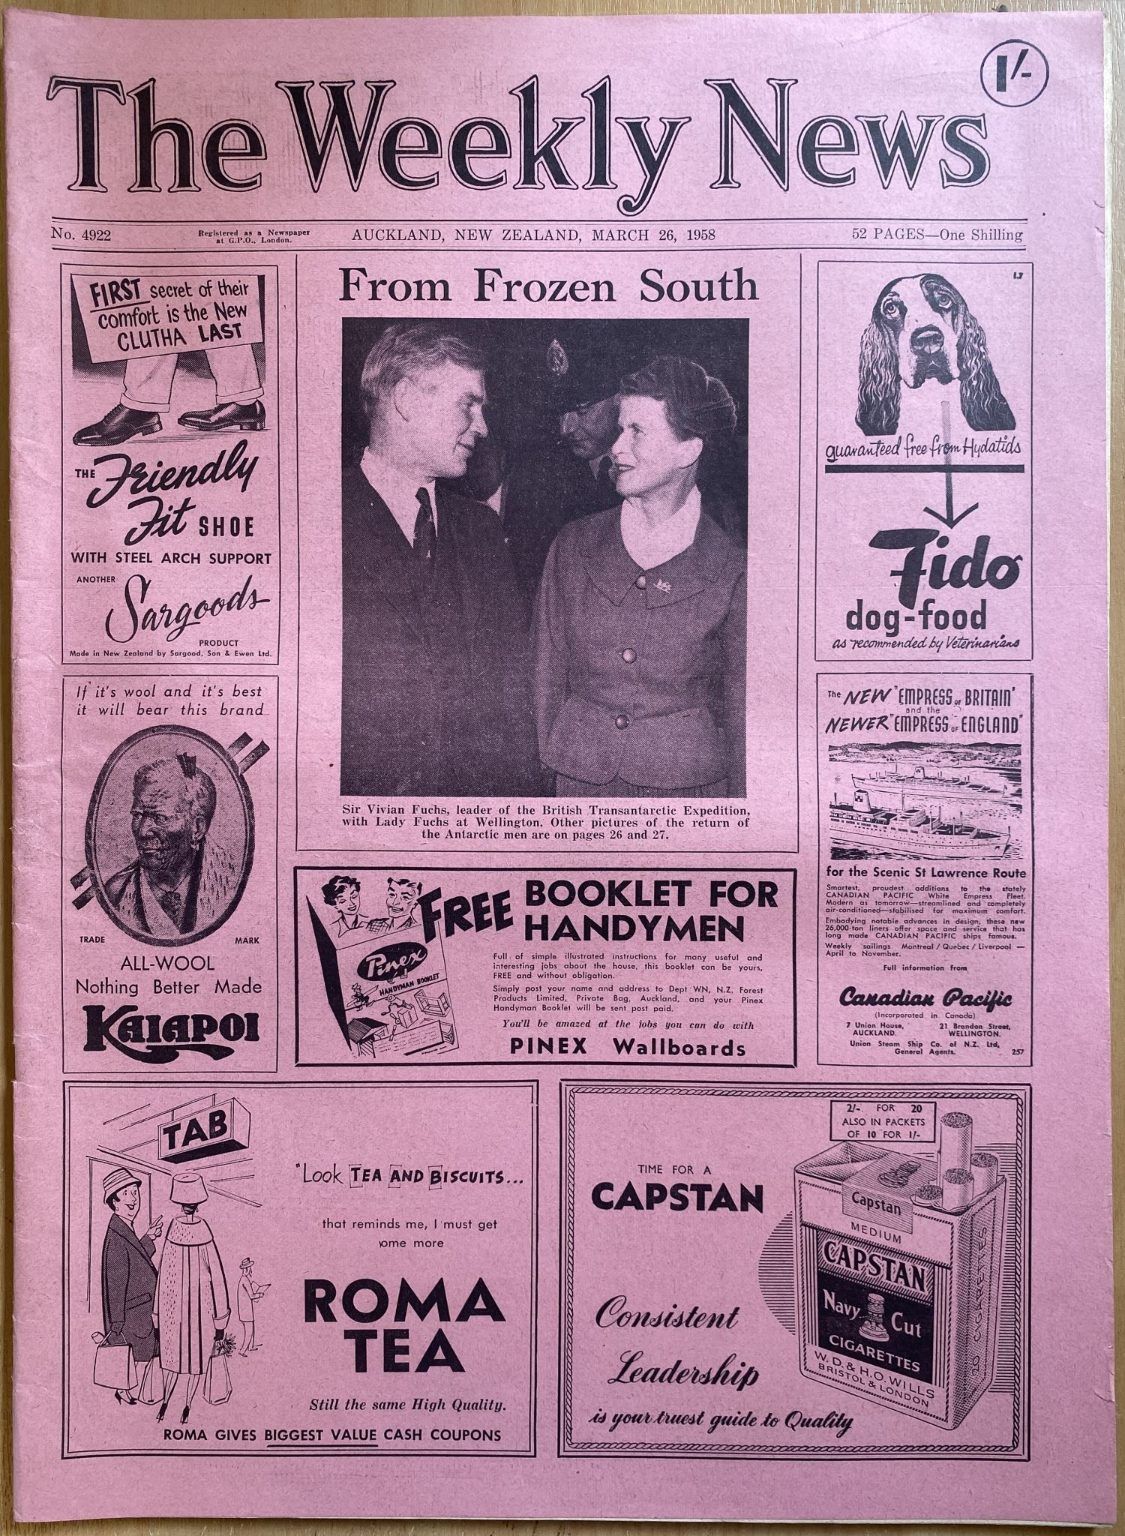 OLD NEWSPAPER: The Weekly News, No. 4922, 26 March 1958